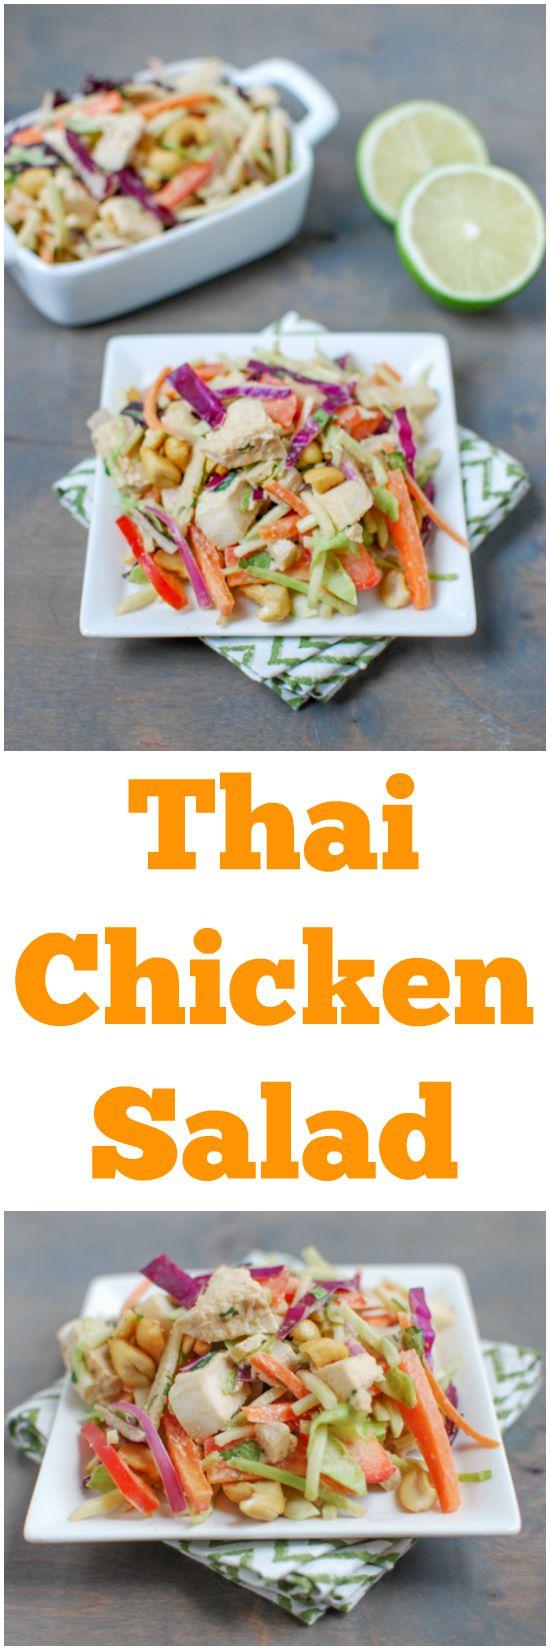 This Thai Chicken Salad is light, crunchy and refreshing, perfect for lunch or dinner on a hot day. Make a big batch and eat the leftovers all week!